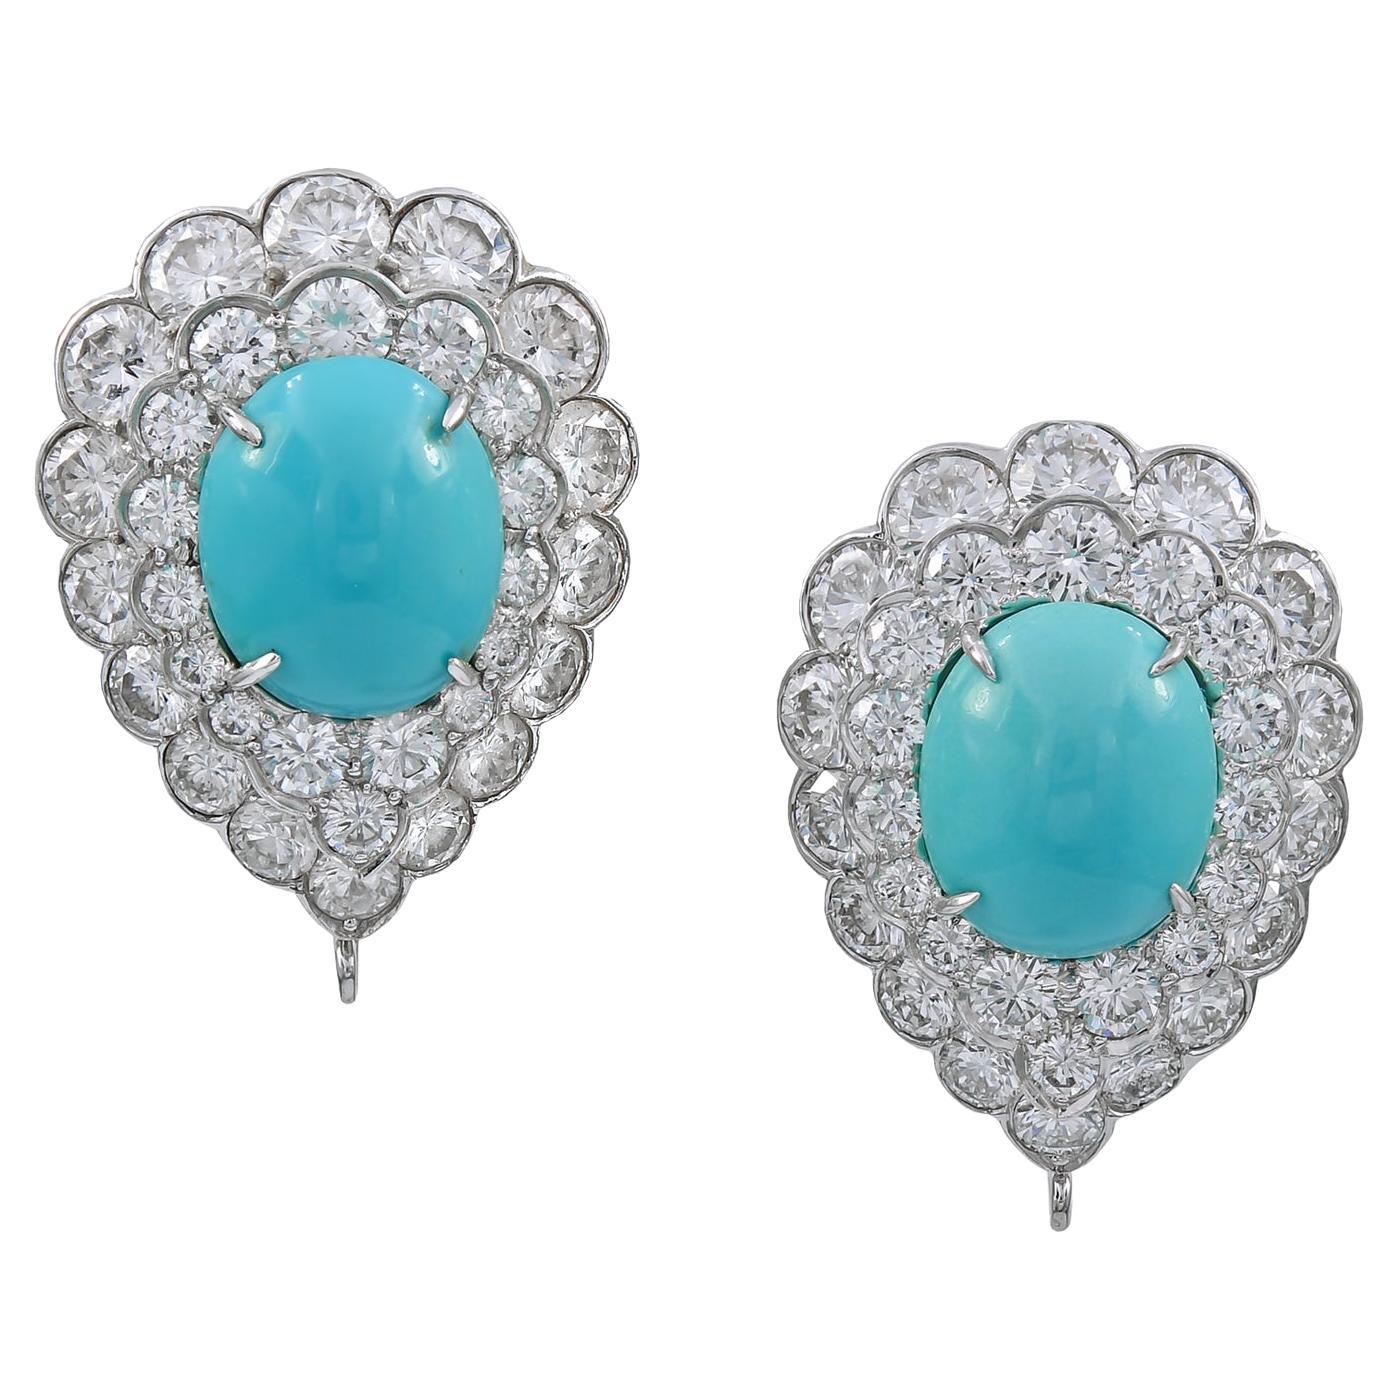 Van Cleef & Arpels Cabochon Turquoise Diamond Earrings, circa 1960s For Sale